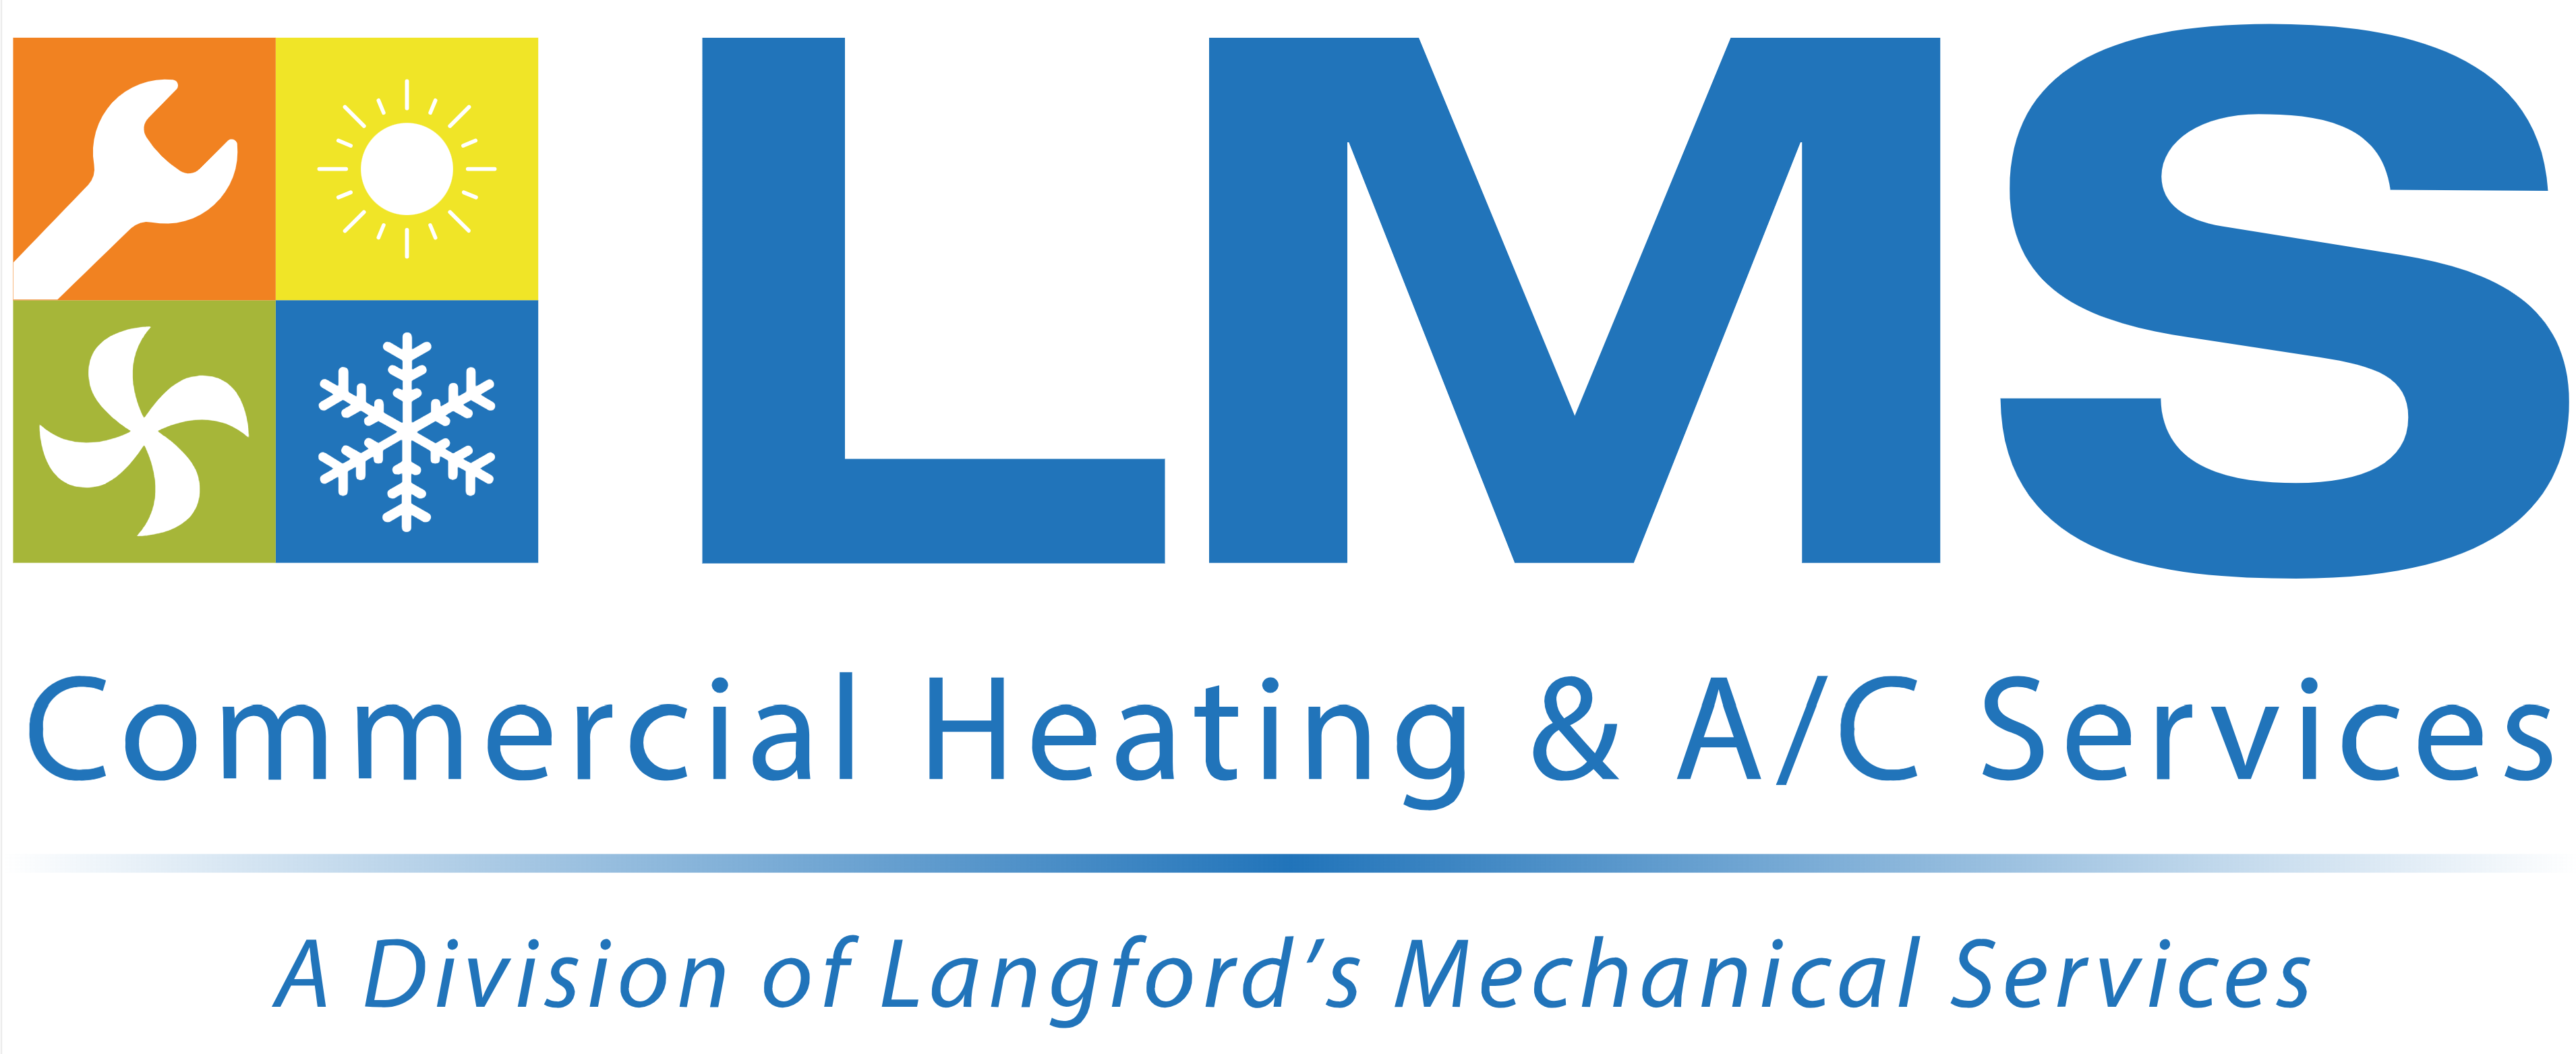 Call Langford's Mechanical Services for 24/7 Heating & Cooling